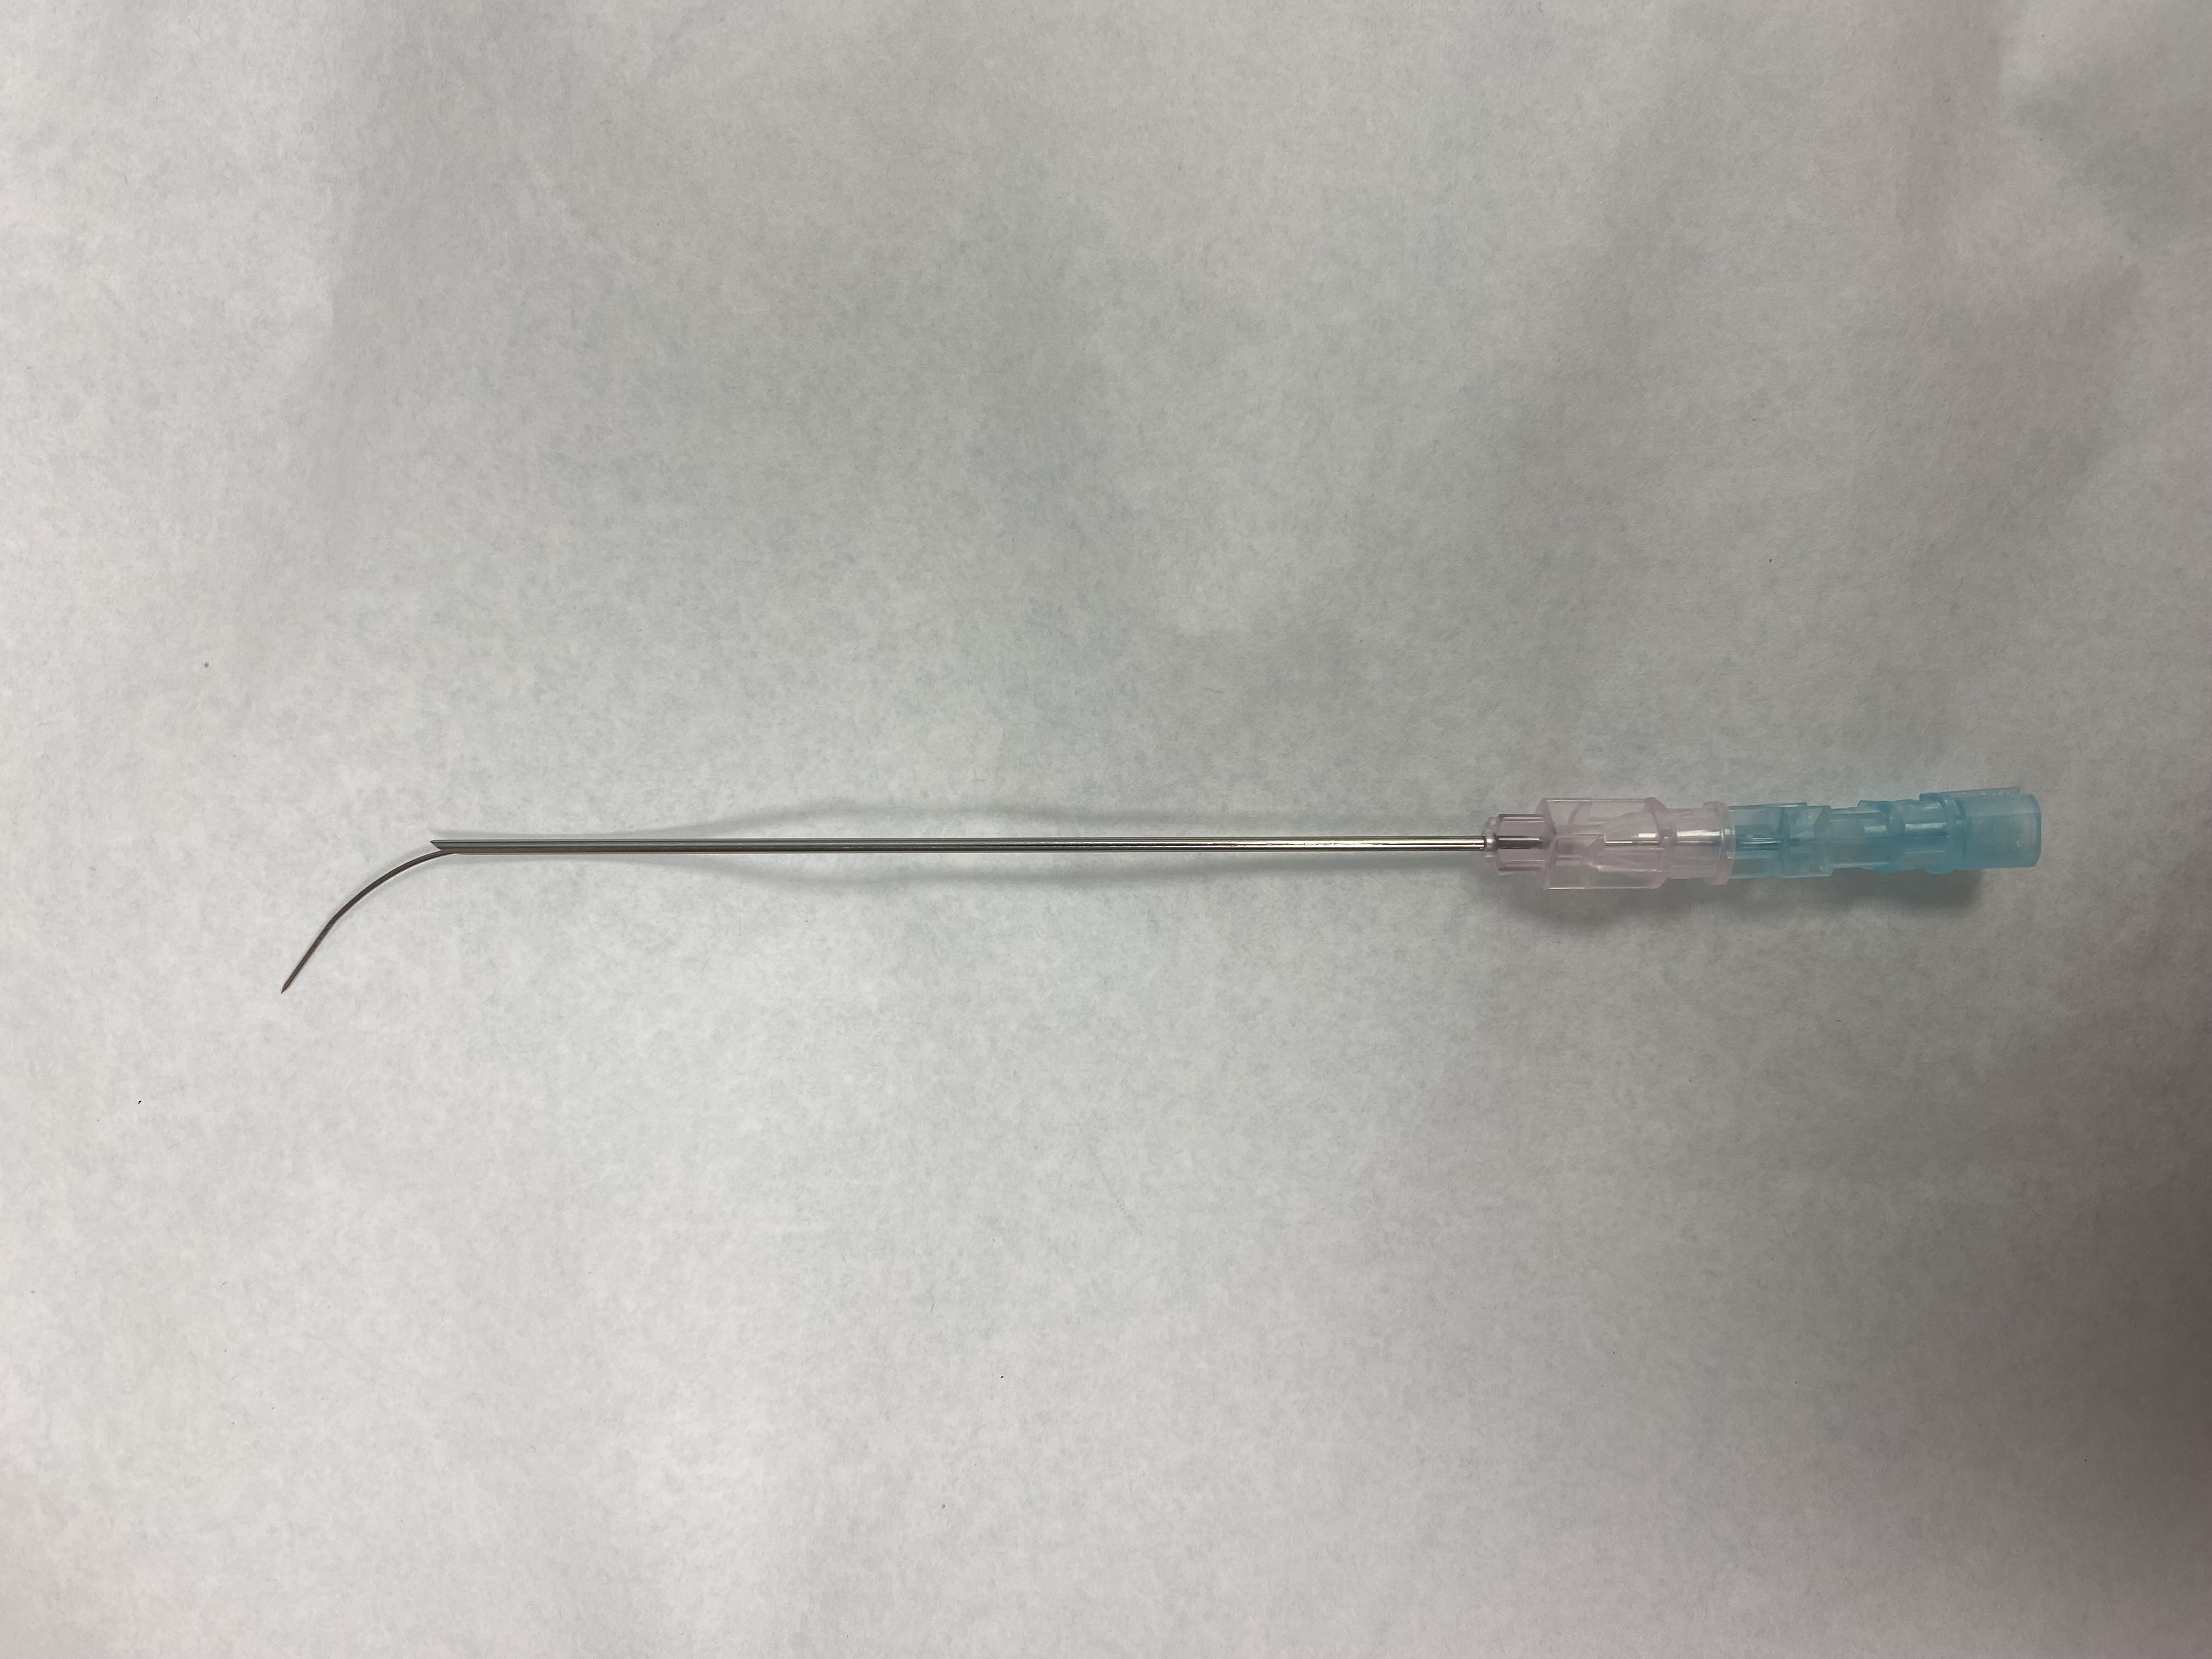 25gauge needle inserted through 18gauge needle bevel of 18gauge facing inward bevel of 25gauge facing outward to navigate medially to the center of the disc and avoid getting too far anterior